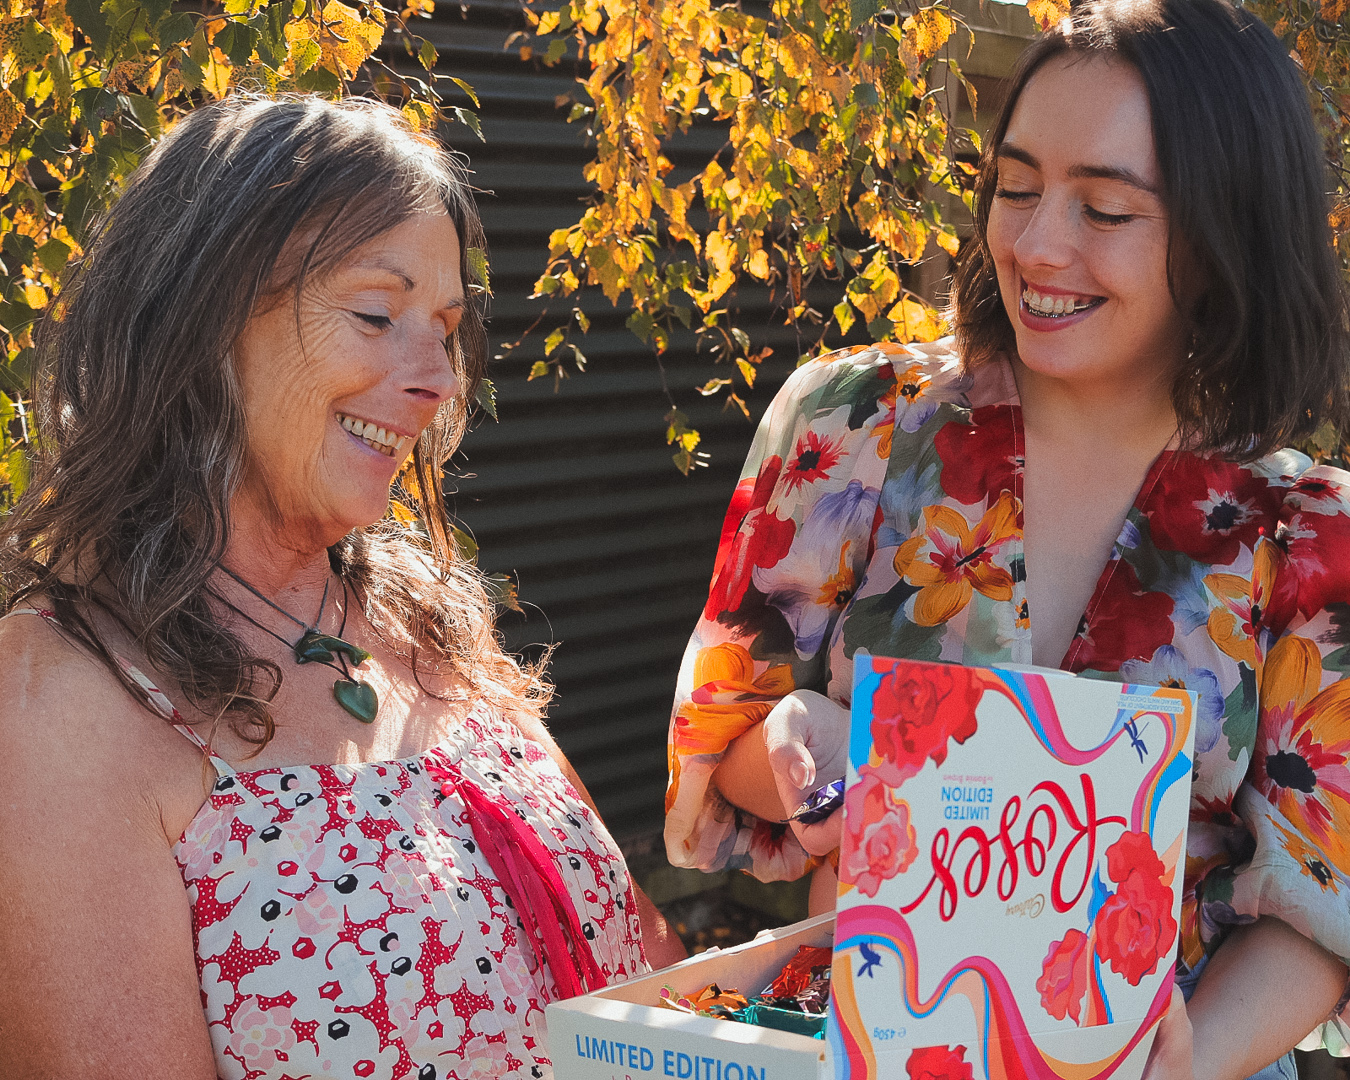 Bonnie Brown on the right showing her mother the new Cadbury Roses box.